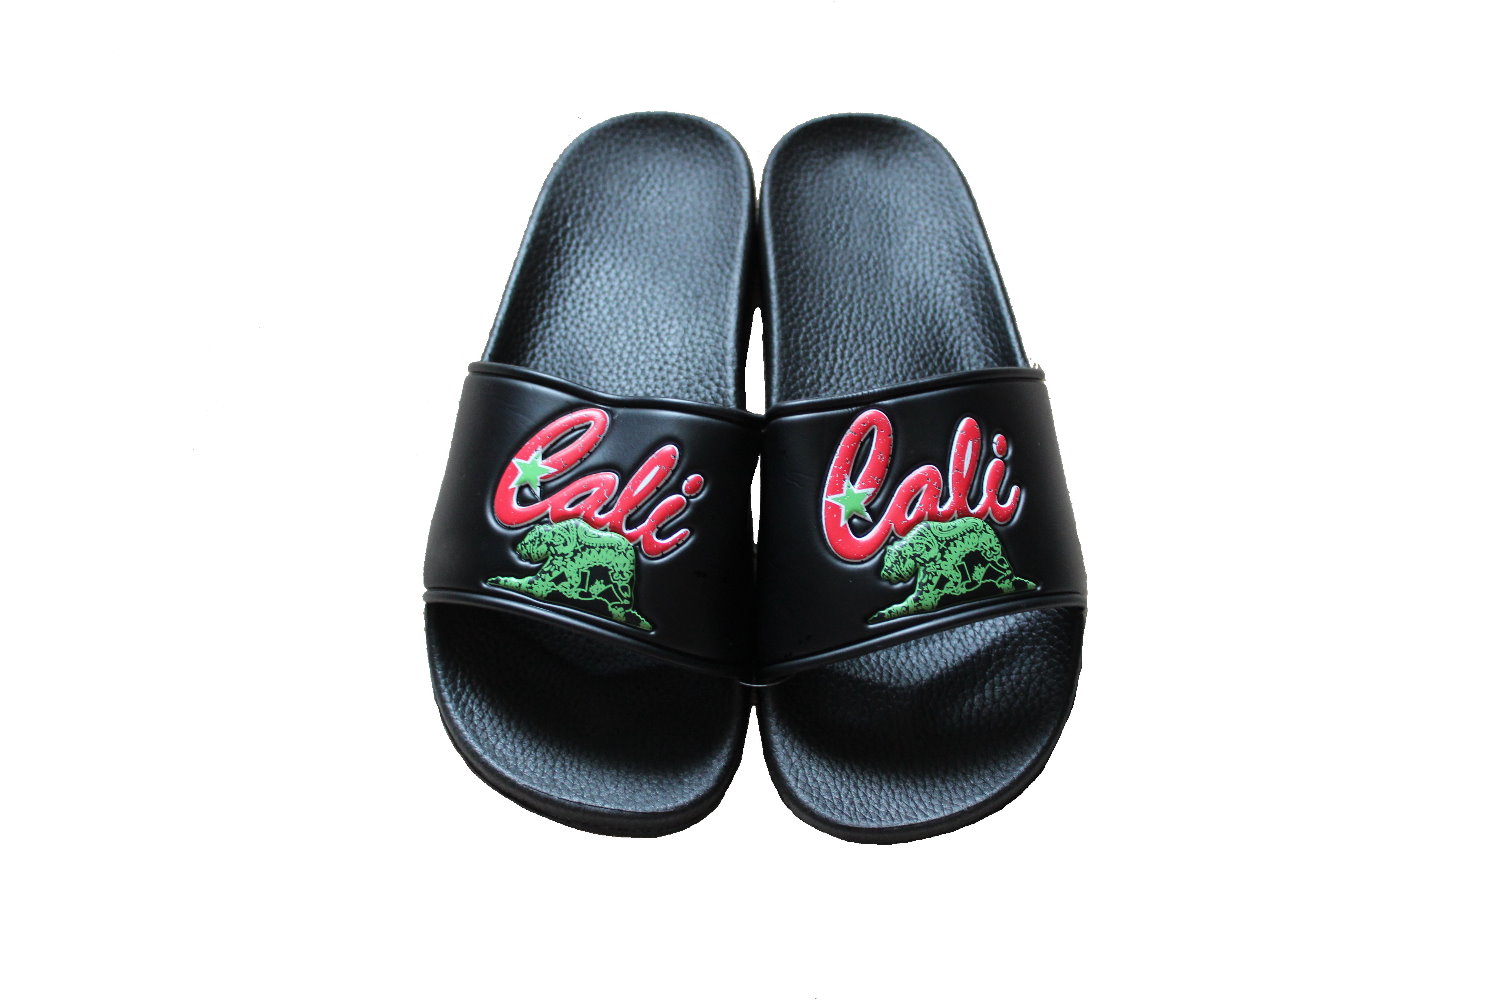 Cali Men's Slide Sandals Free Shipping anywhere in United States!